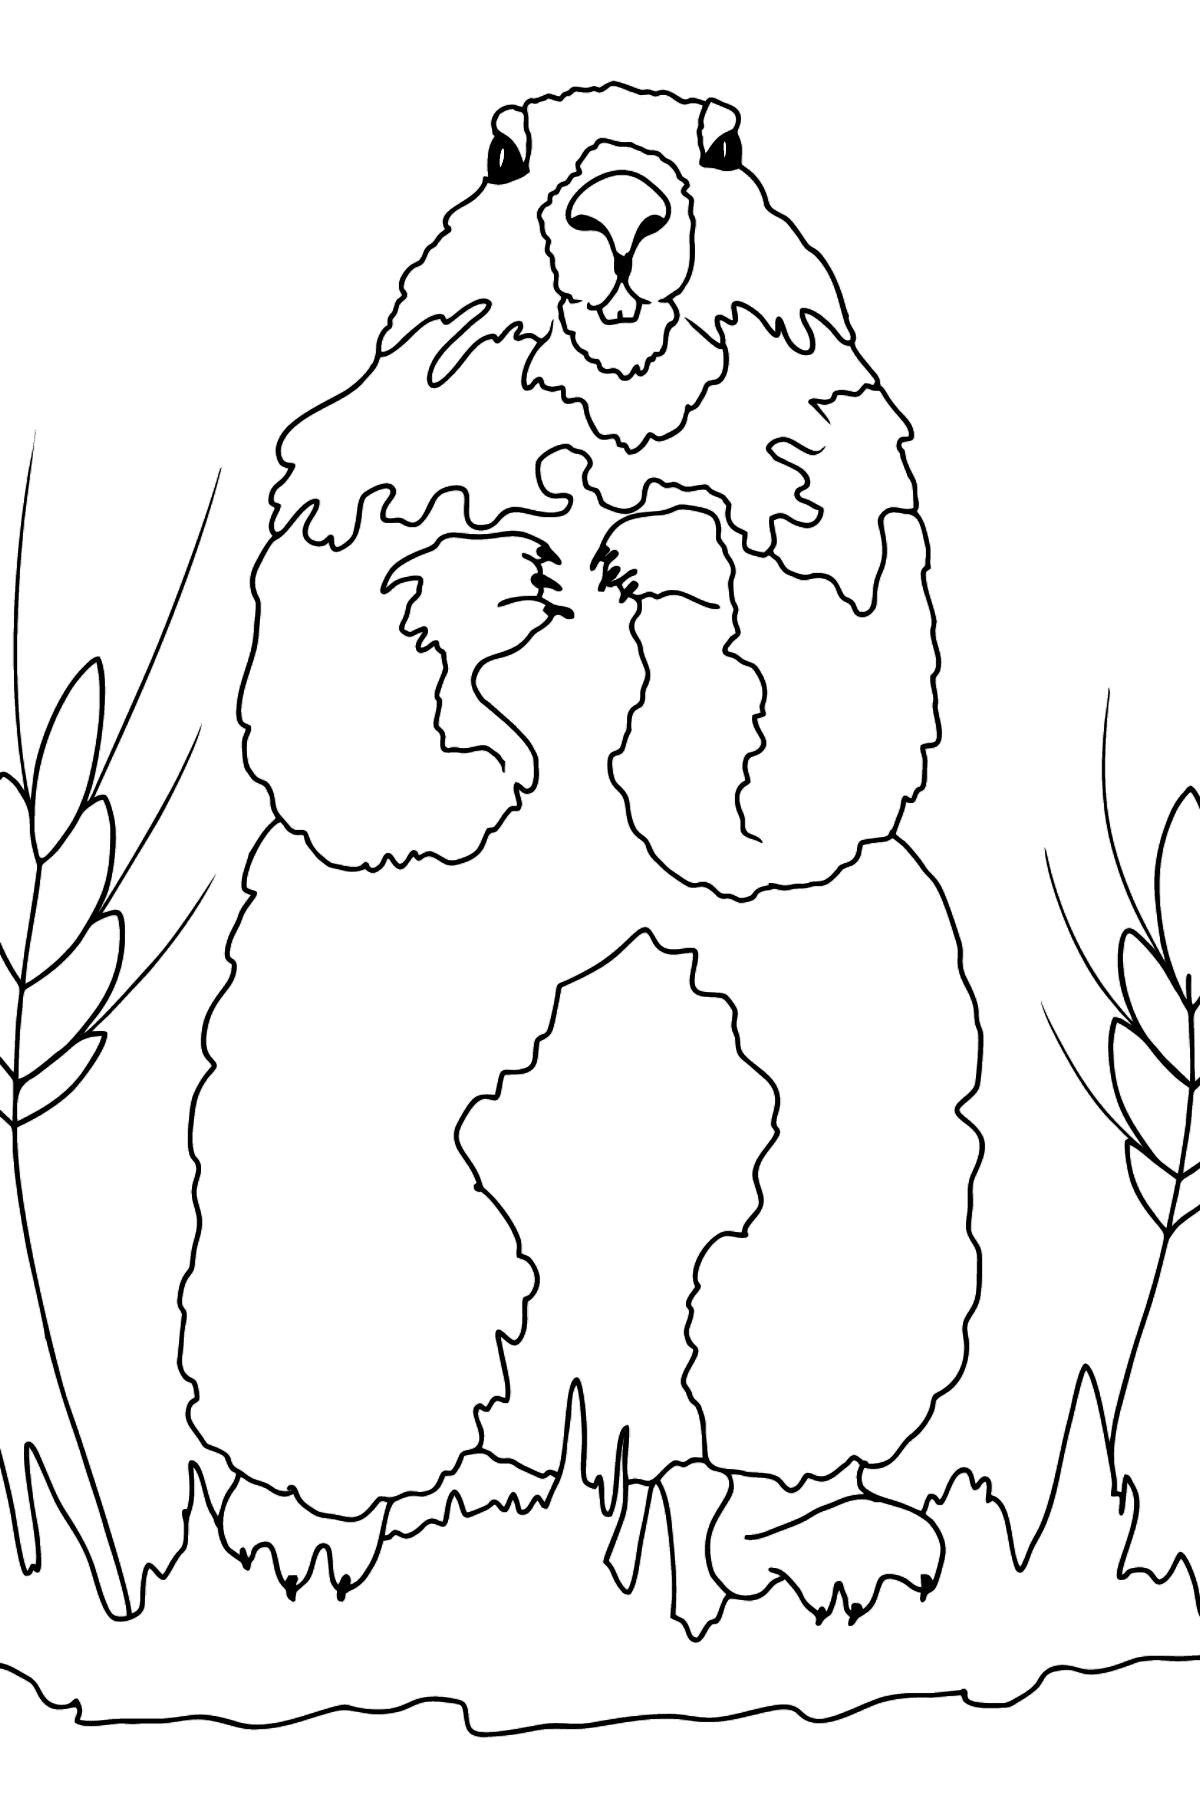 Coloring Page - A Groundhog is Looking Around - Coloring Pages for Kids